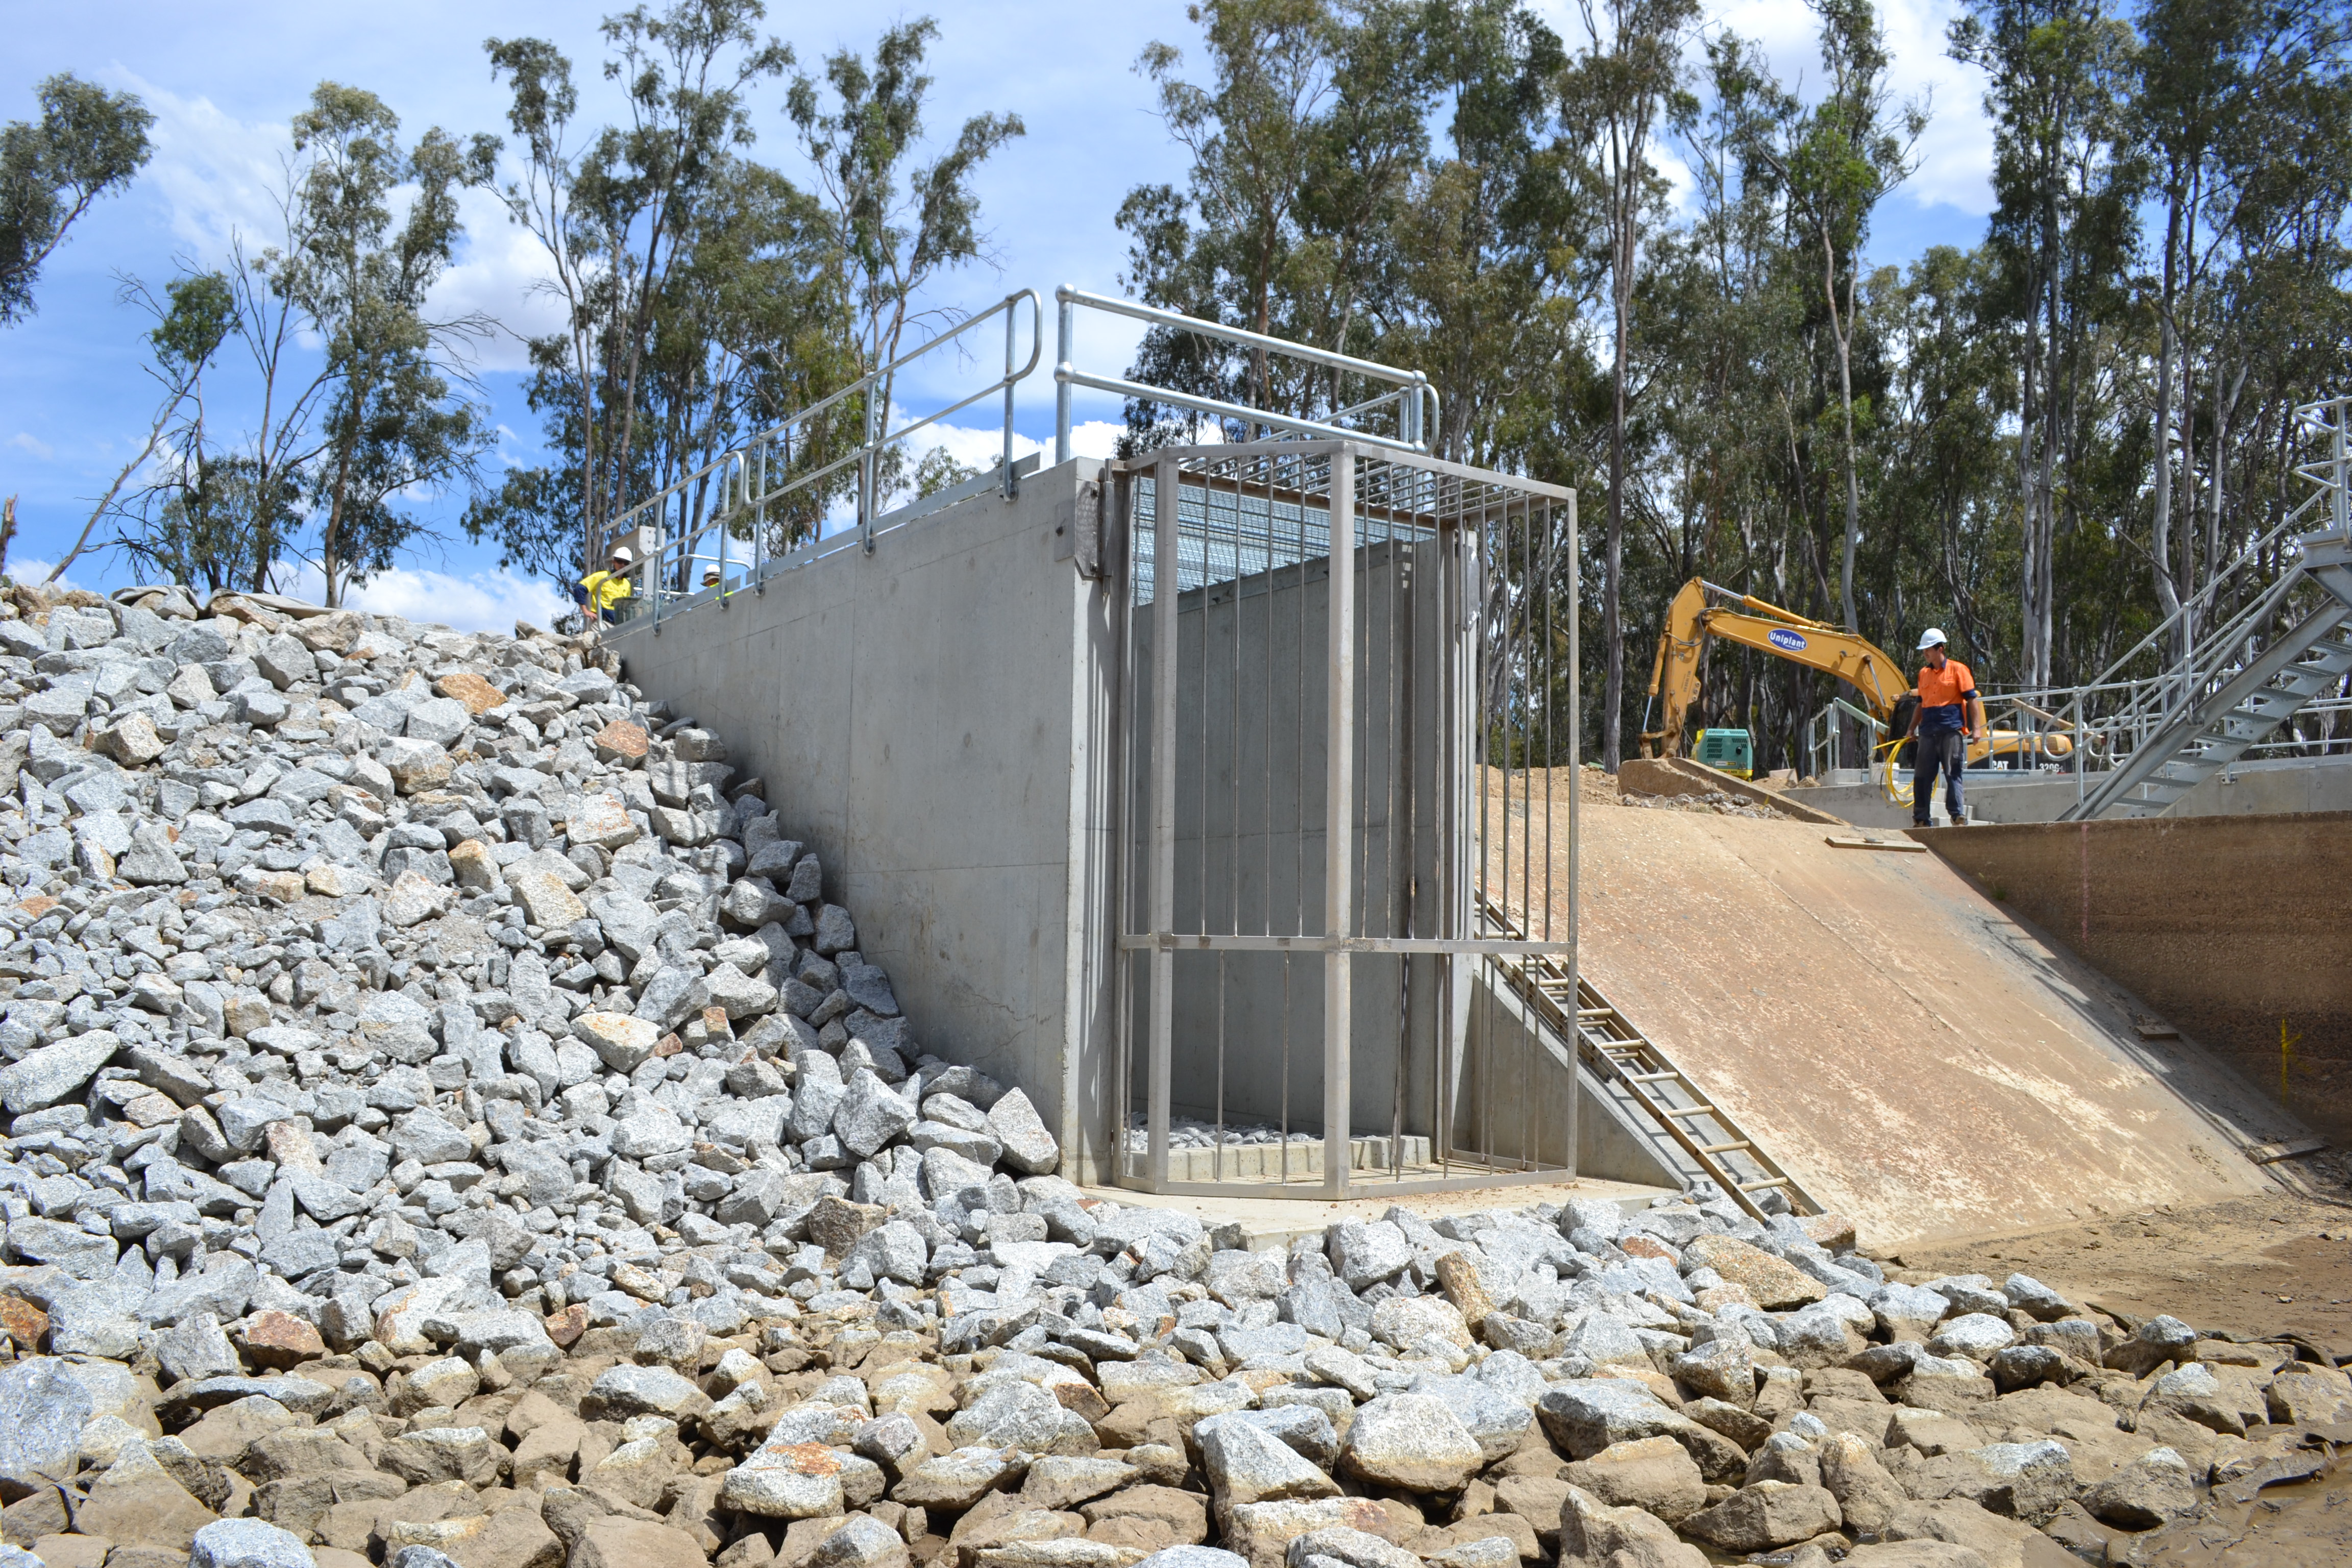 Large trash rack at fishway entrance during construction (Yallakool Creek, New South Wales)
Photo by Ivor Stuart